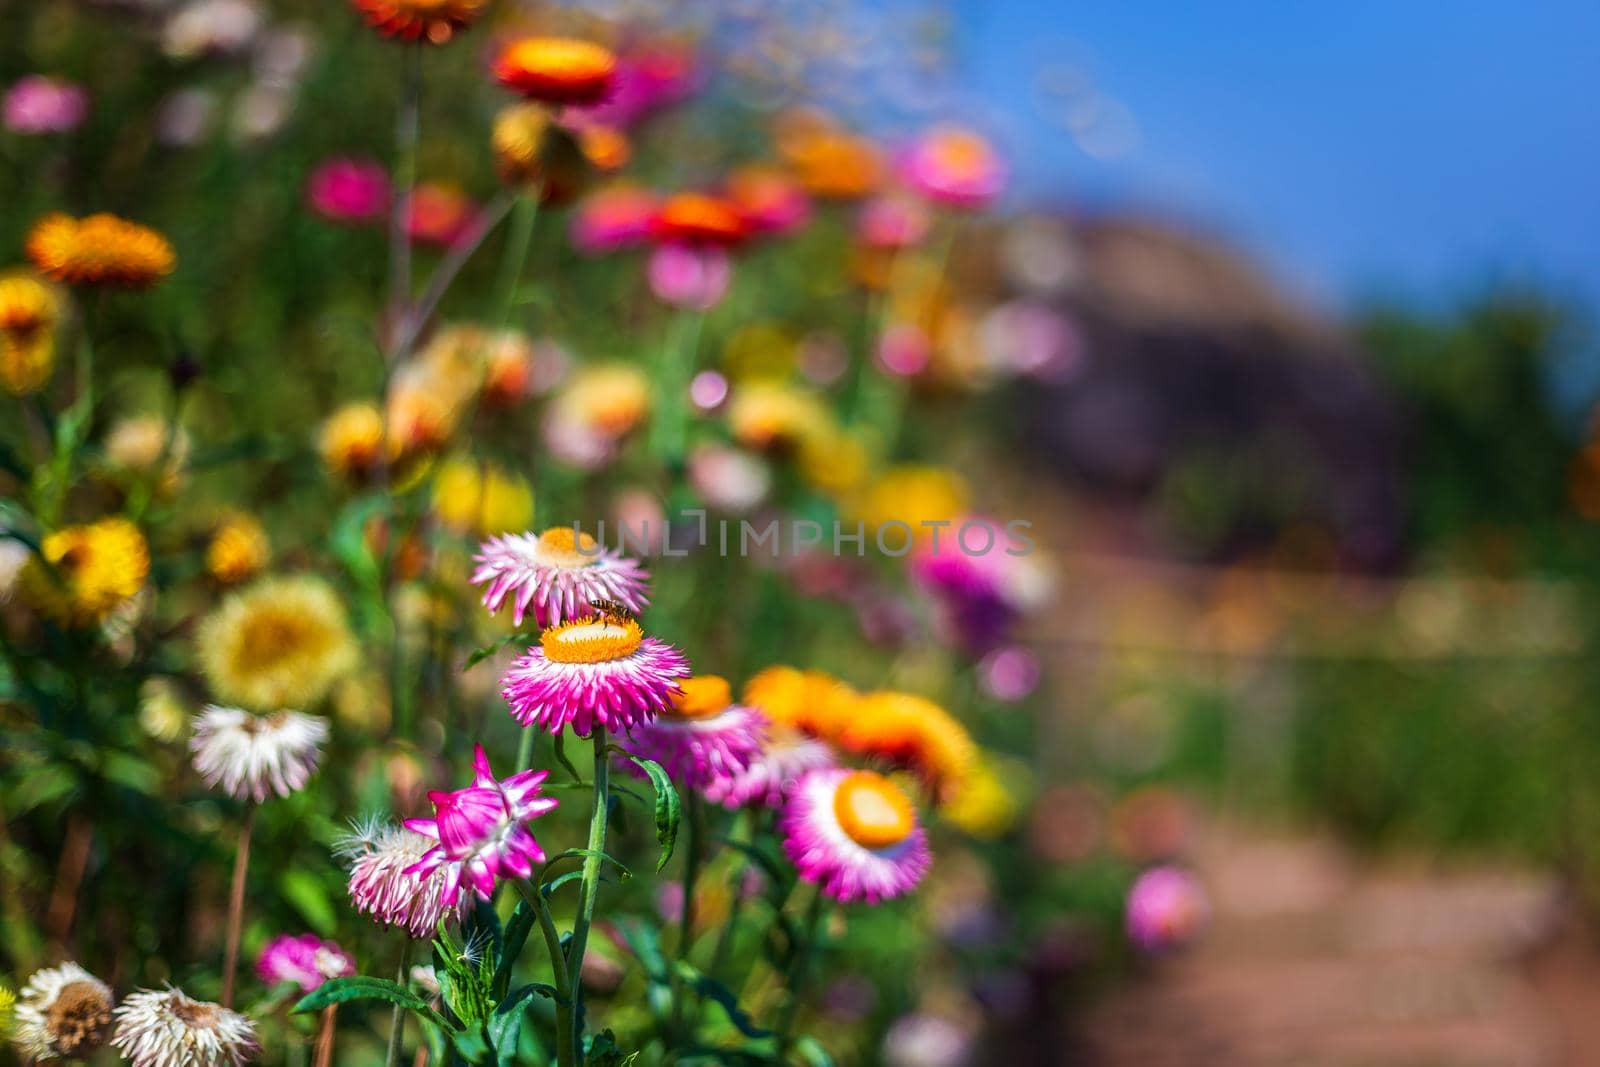 Straw flower of colourful beautiful on green grass nature in a spring garden. 